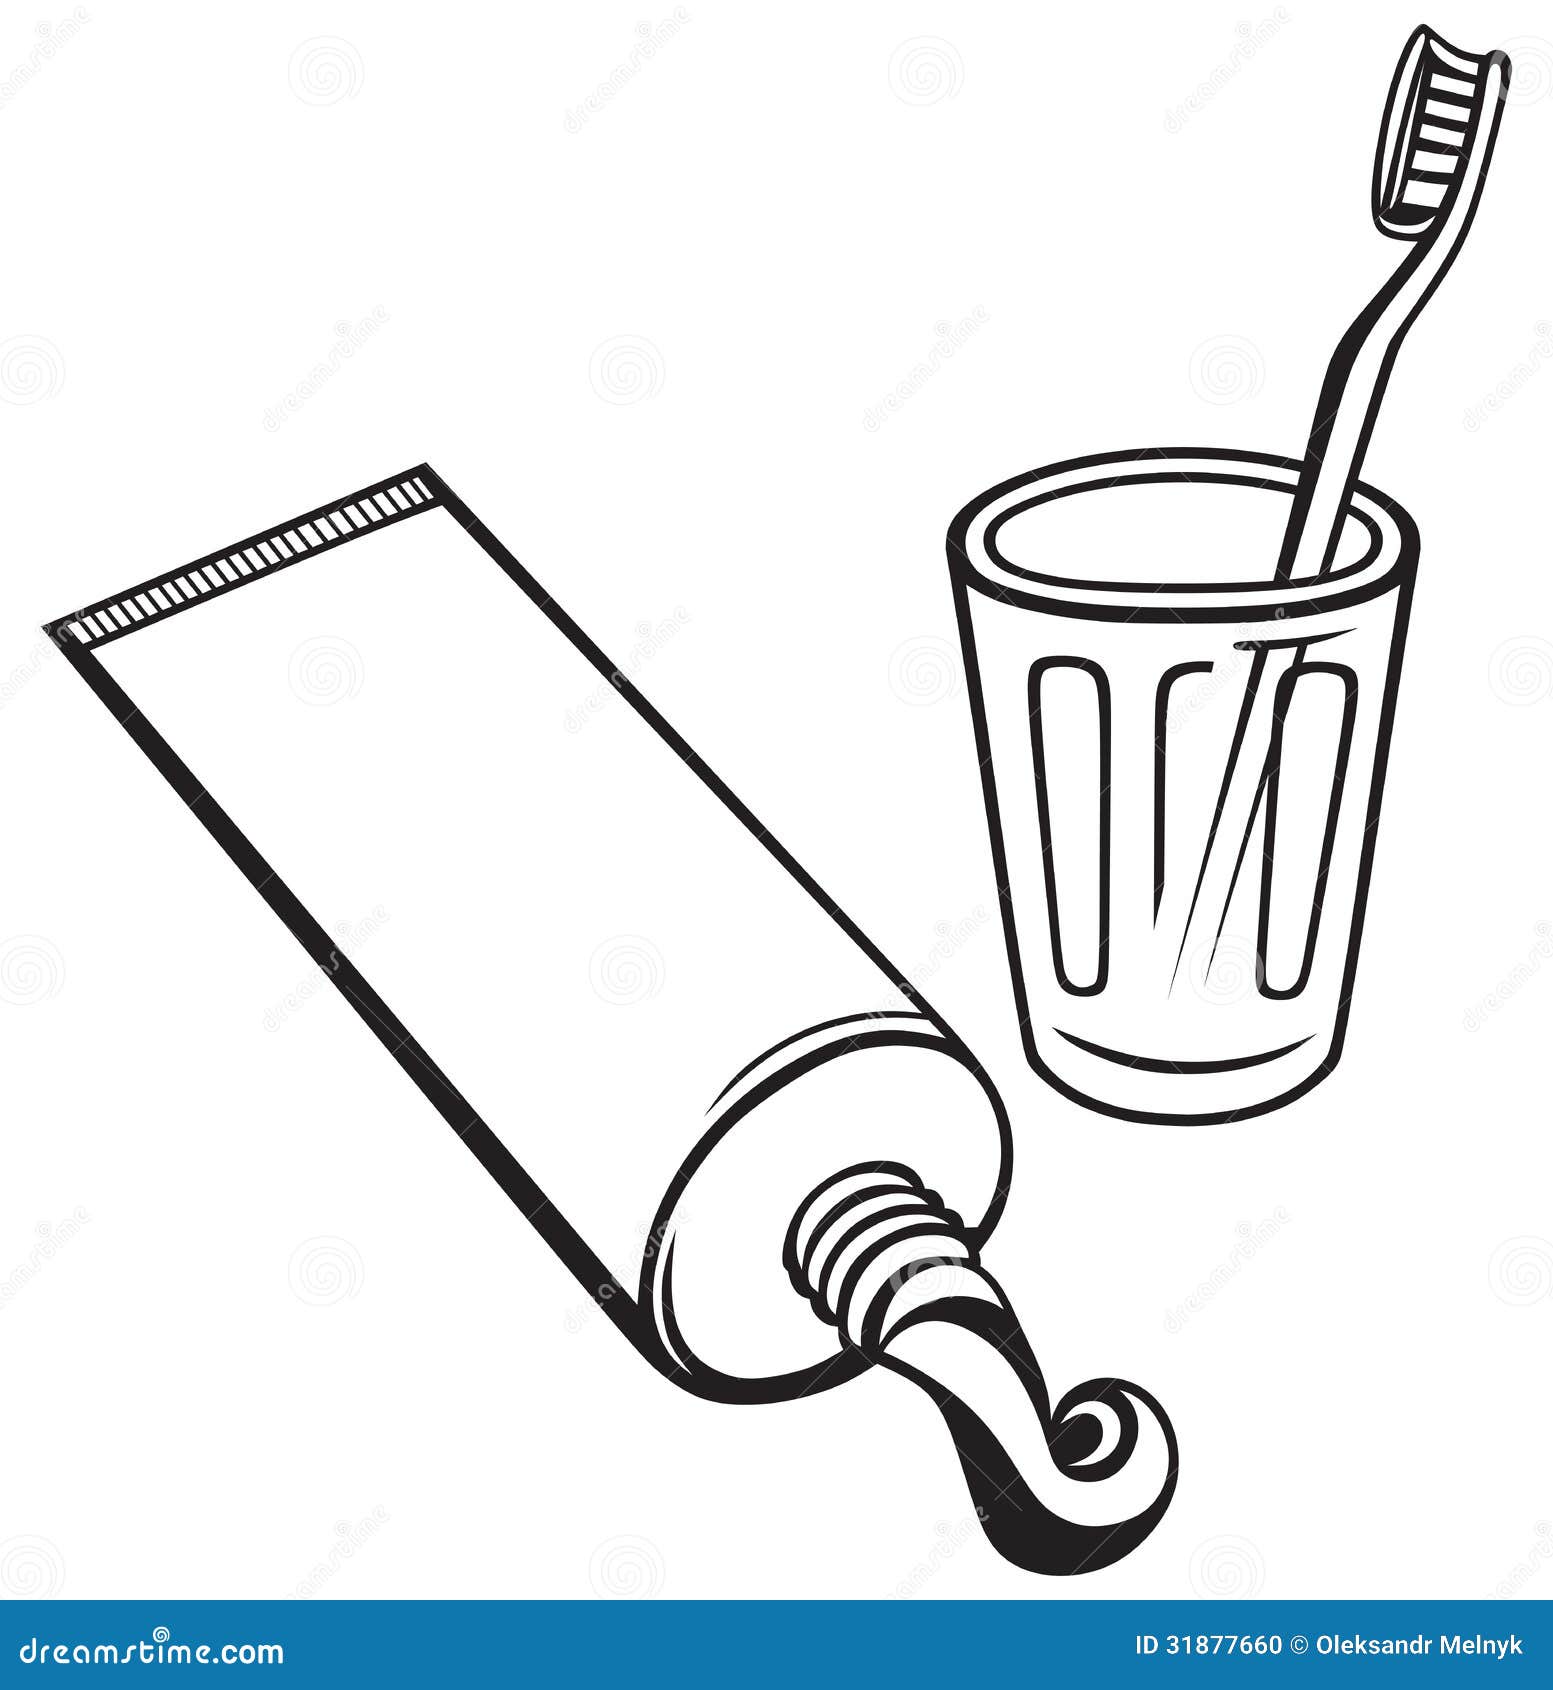 toothbrush clipart black and white - photo #7